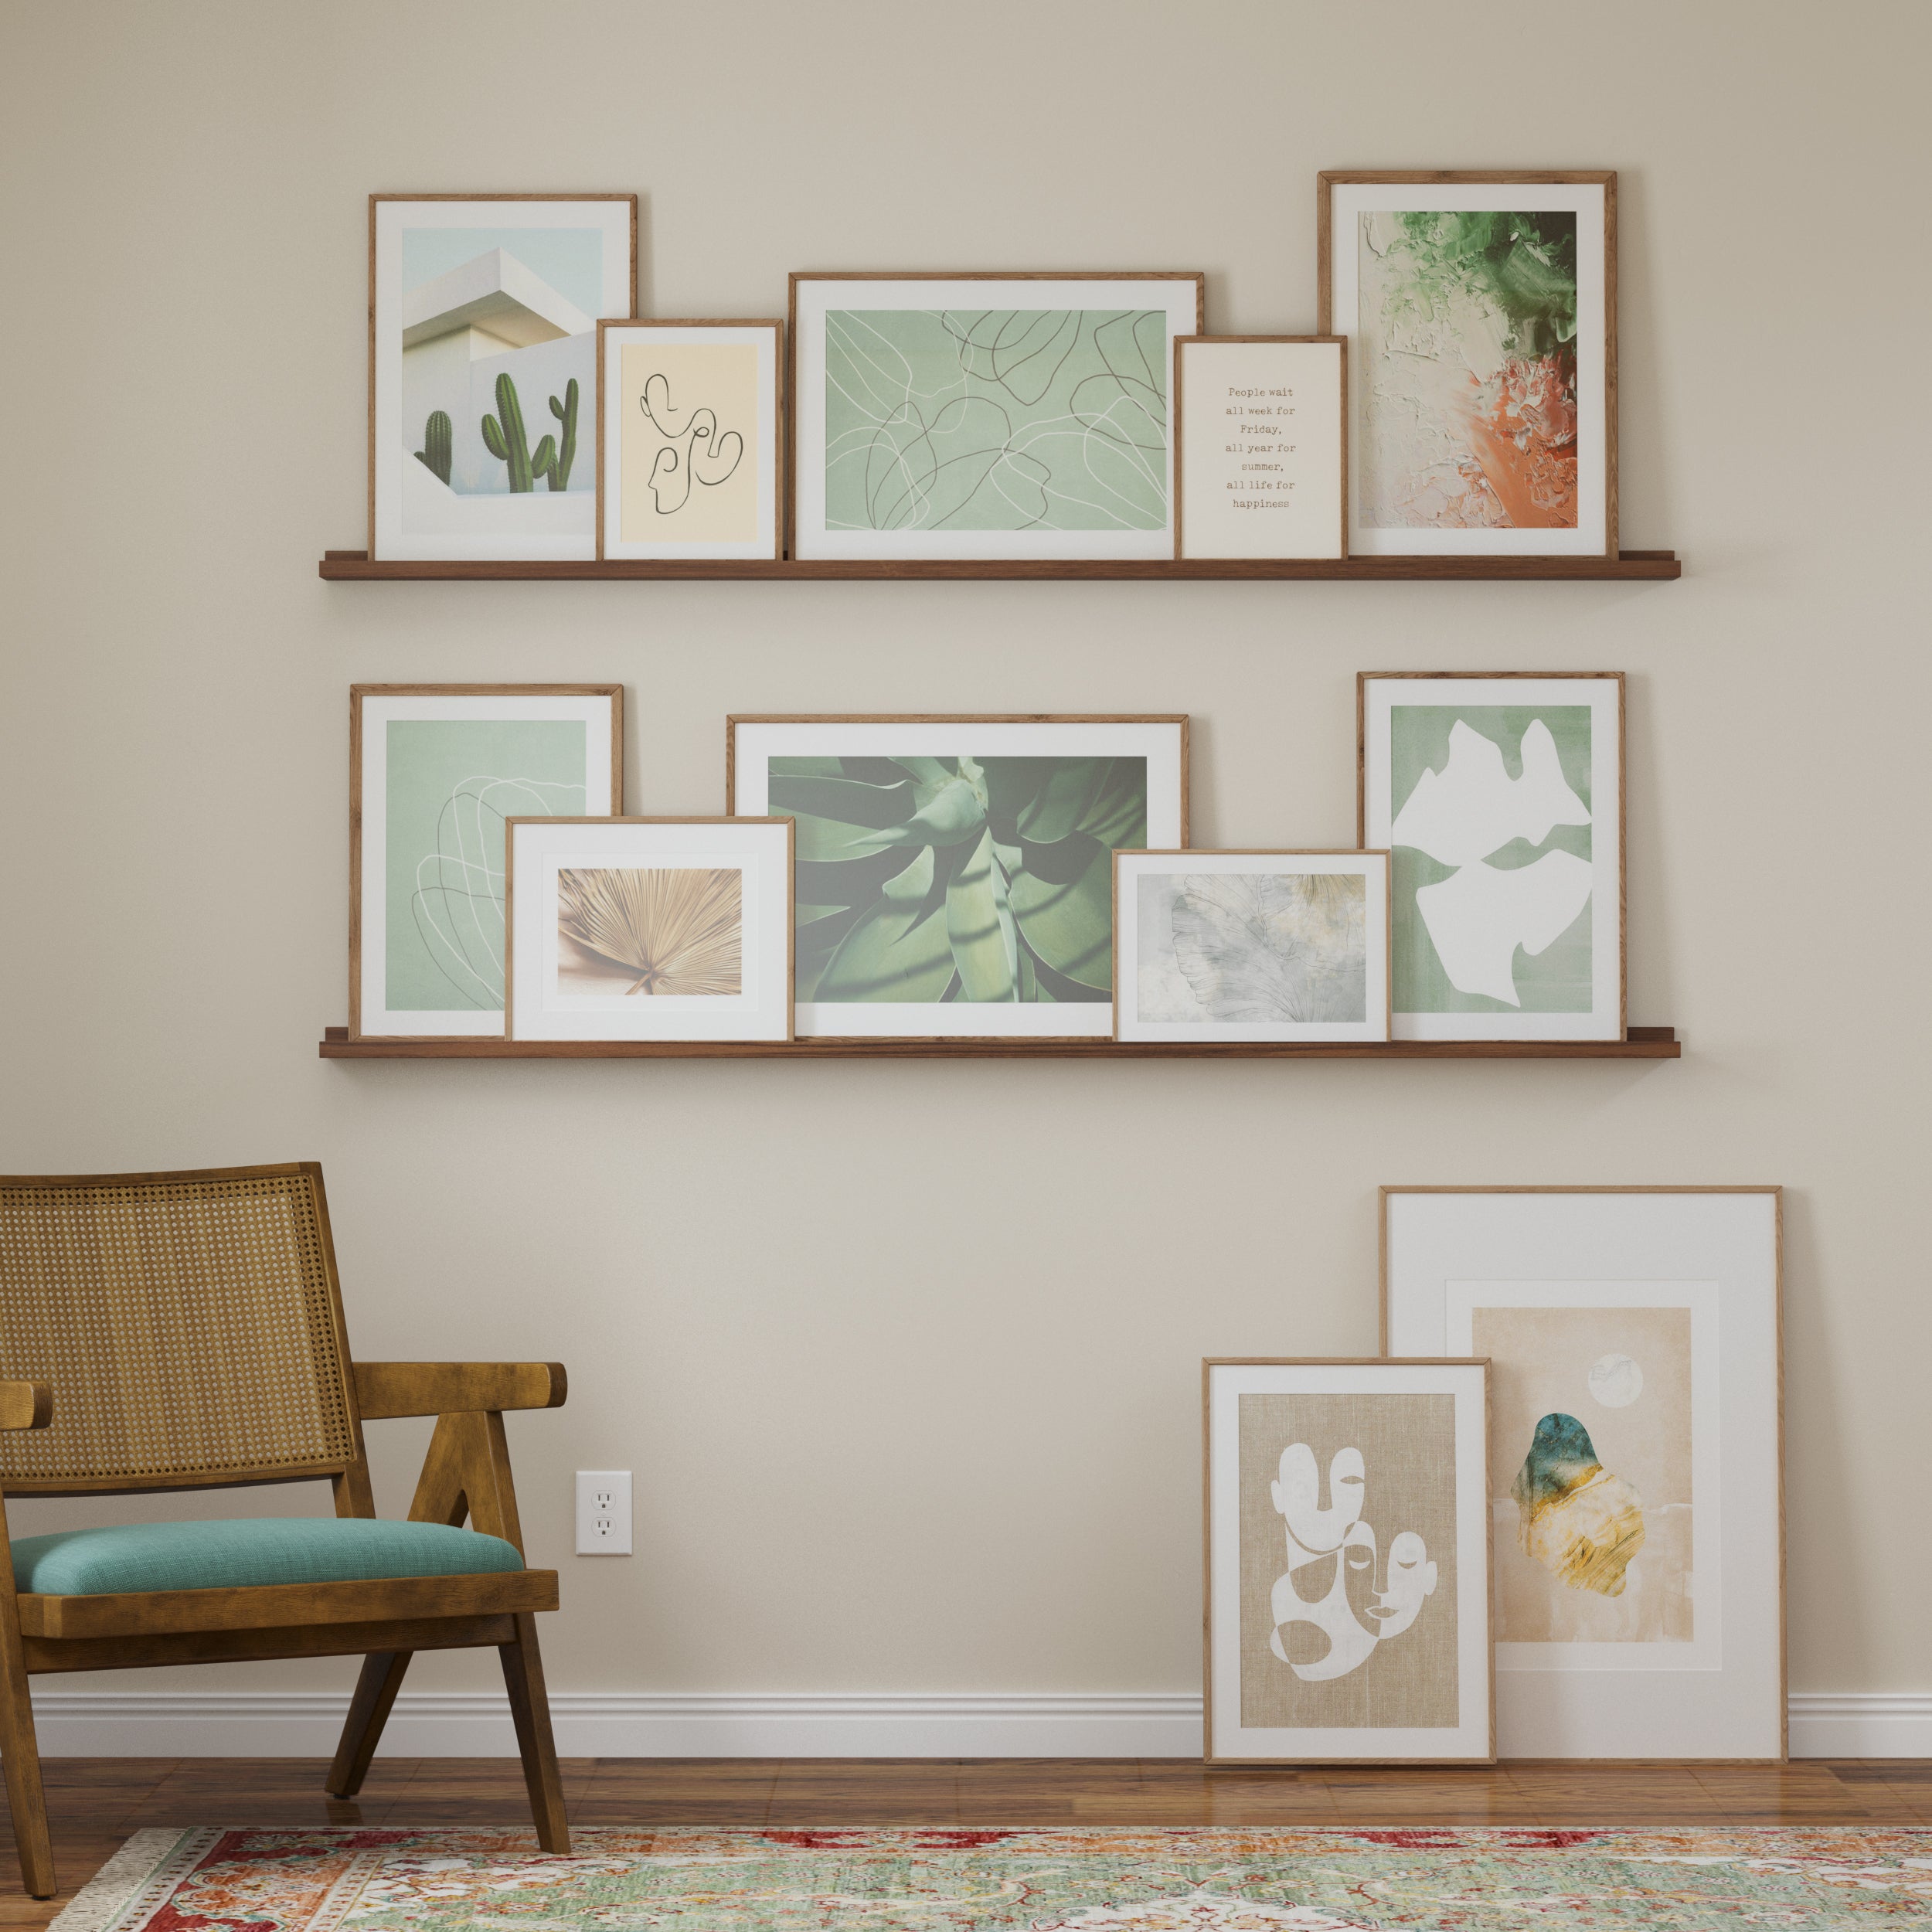 A serene reading nook with two walnut wall shelves, showcasing a collection of framed abstract and botanical art.